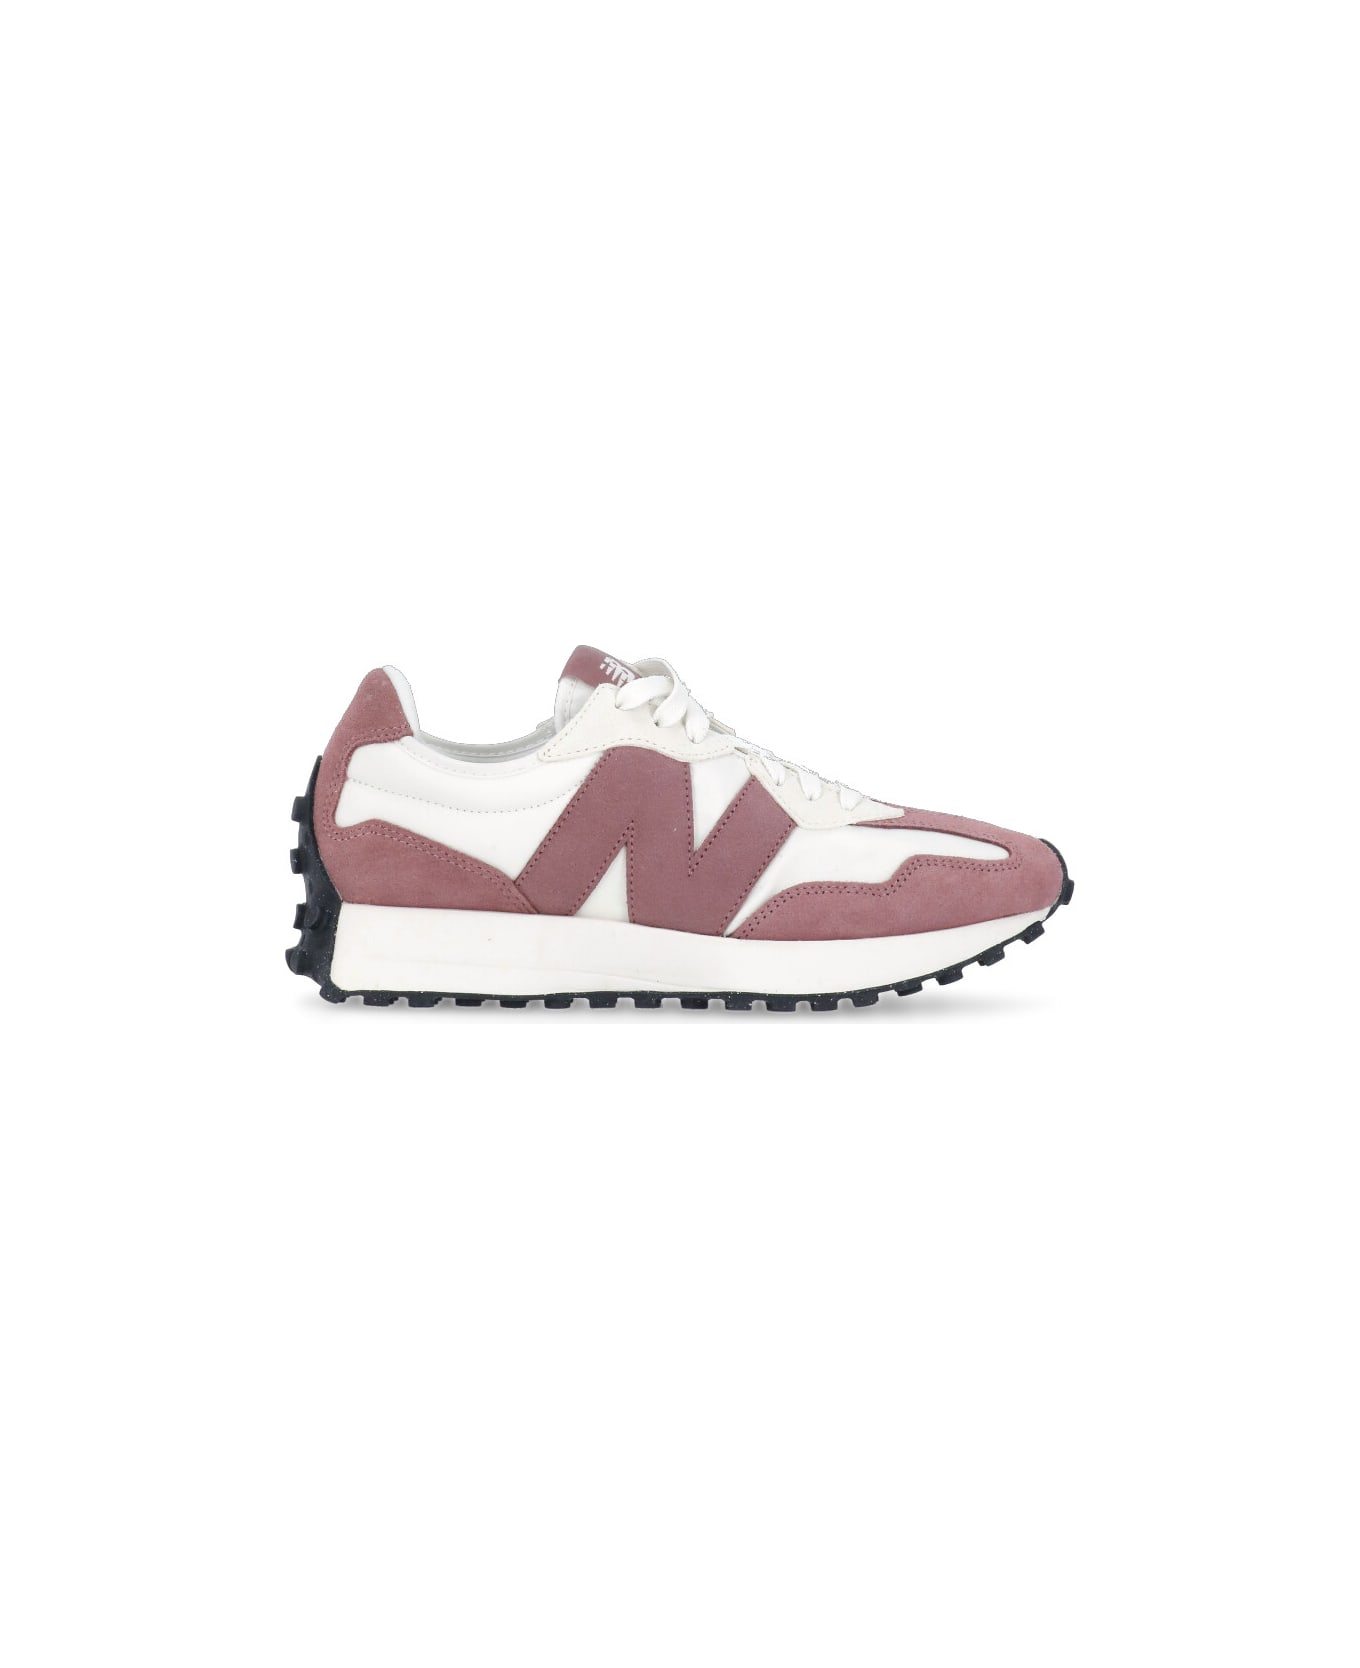 New Balance 327 Sneakers - Pink